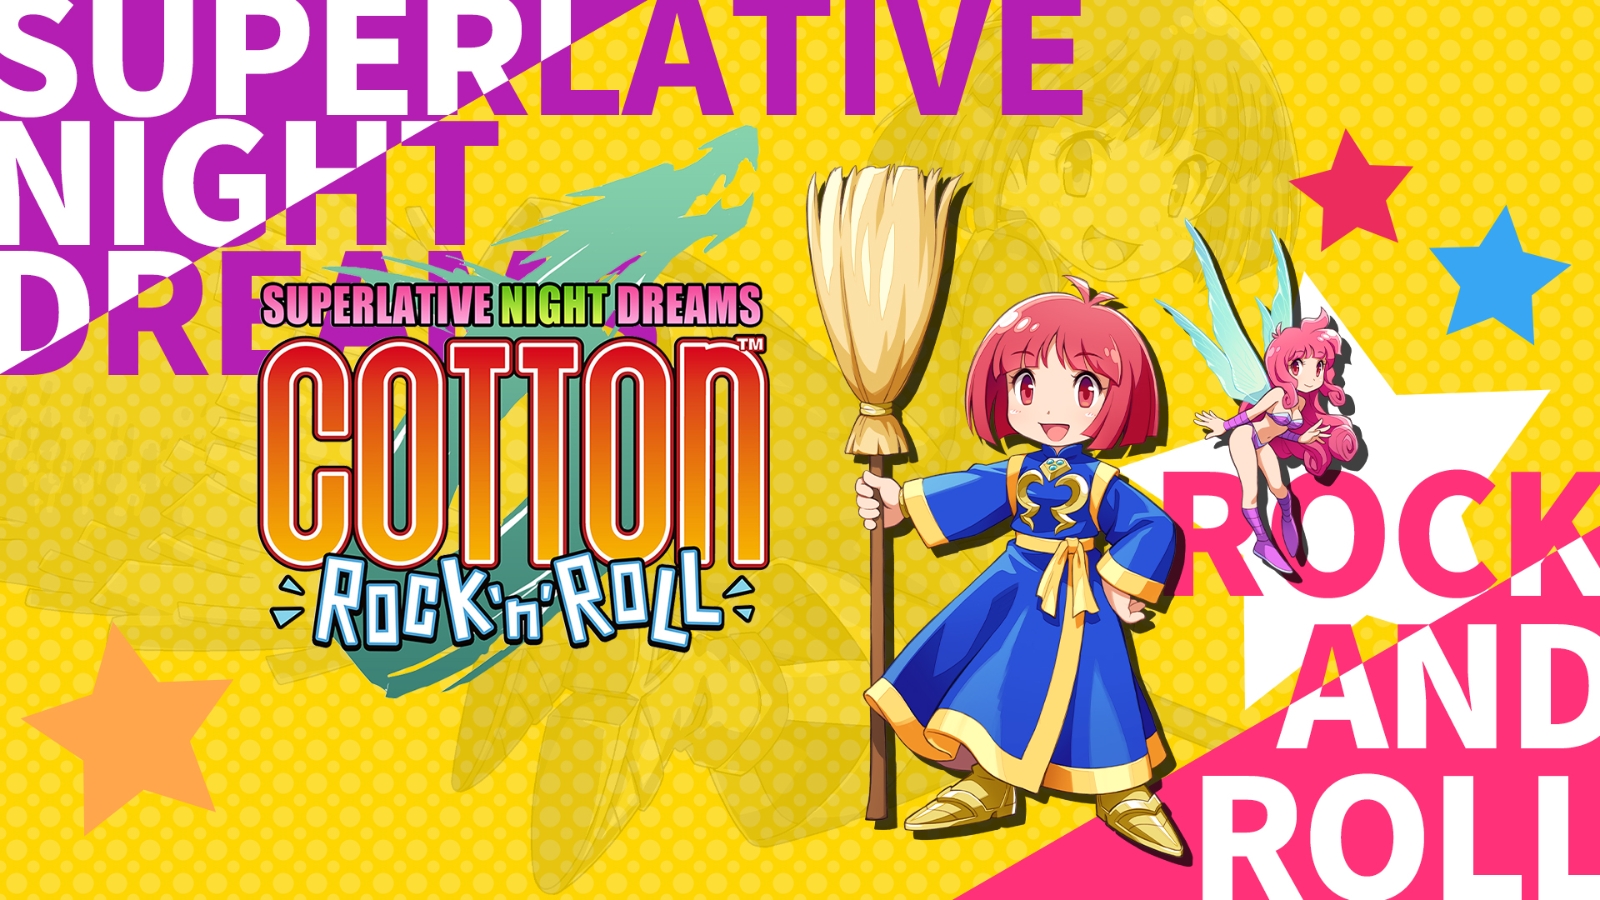 Cotton Rock 'n' Roll for PlayStation 4 